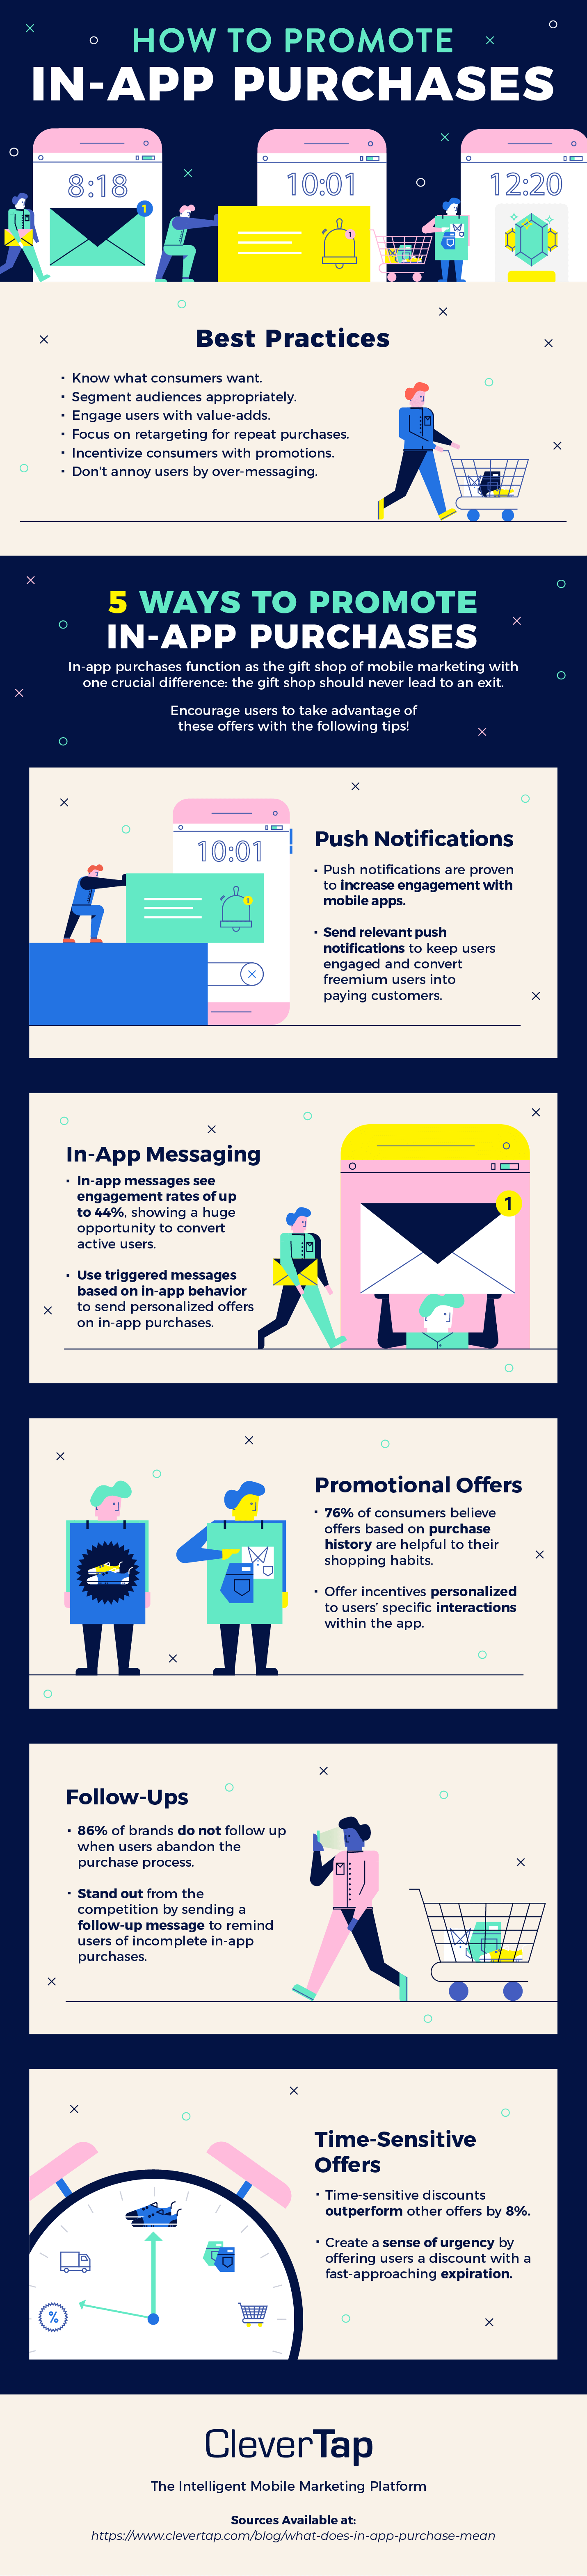 in app purchase tips and tricks